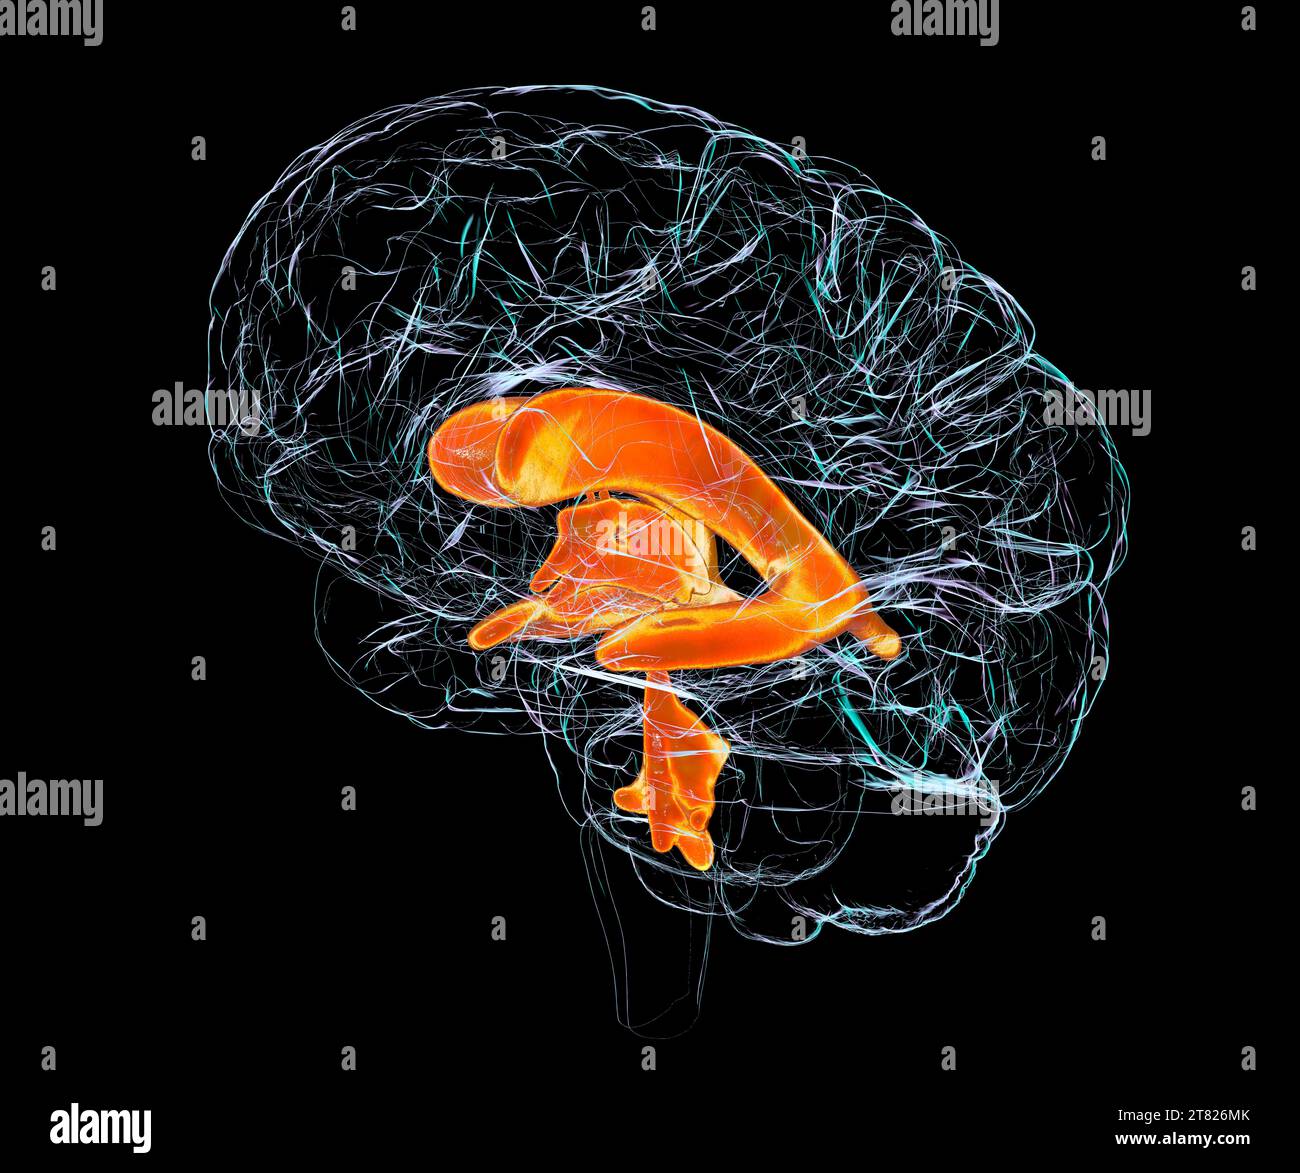 Ventricular system of a child's brain, illustration Stock Photo